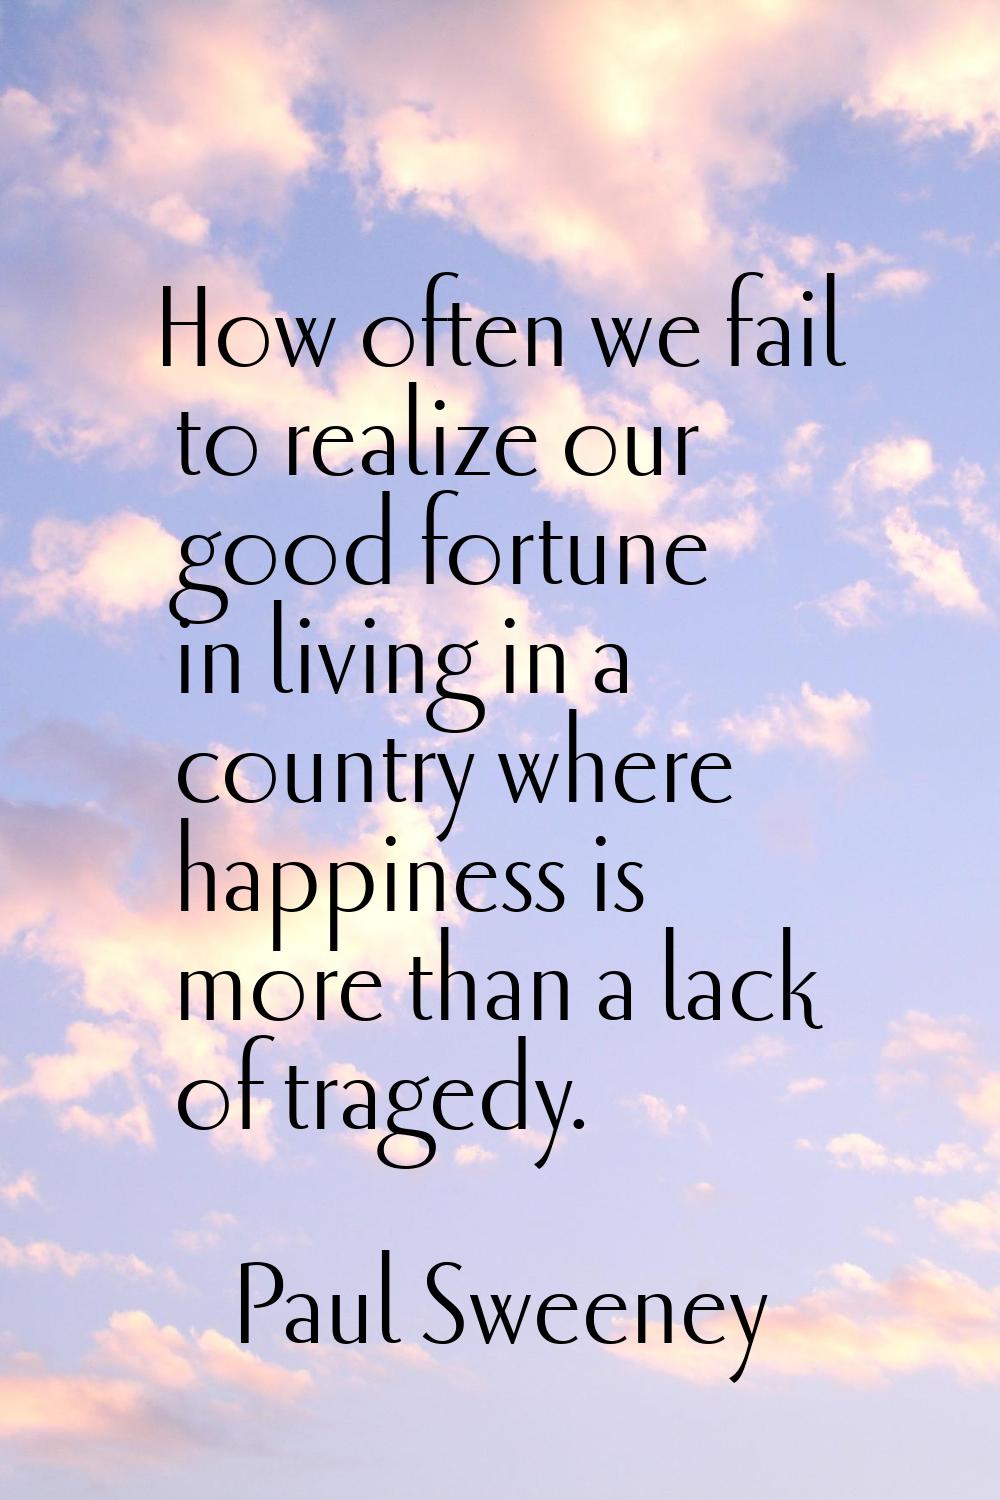 How often we fail to realize our good fortune in living in a country where happiness is more than a